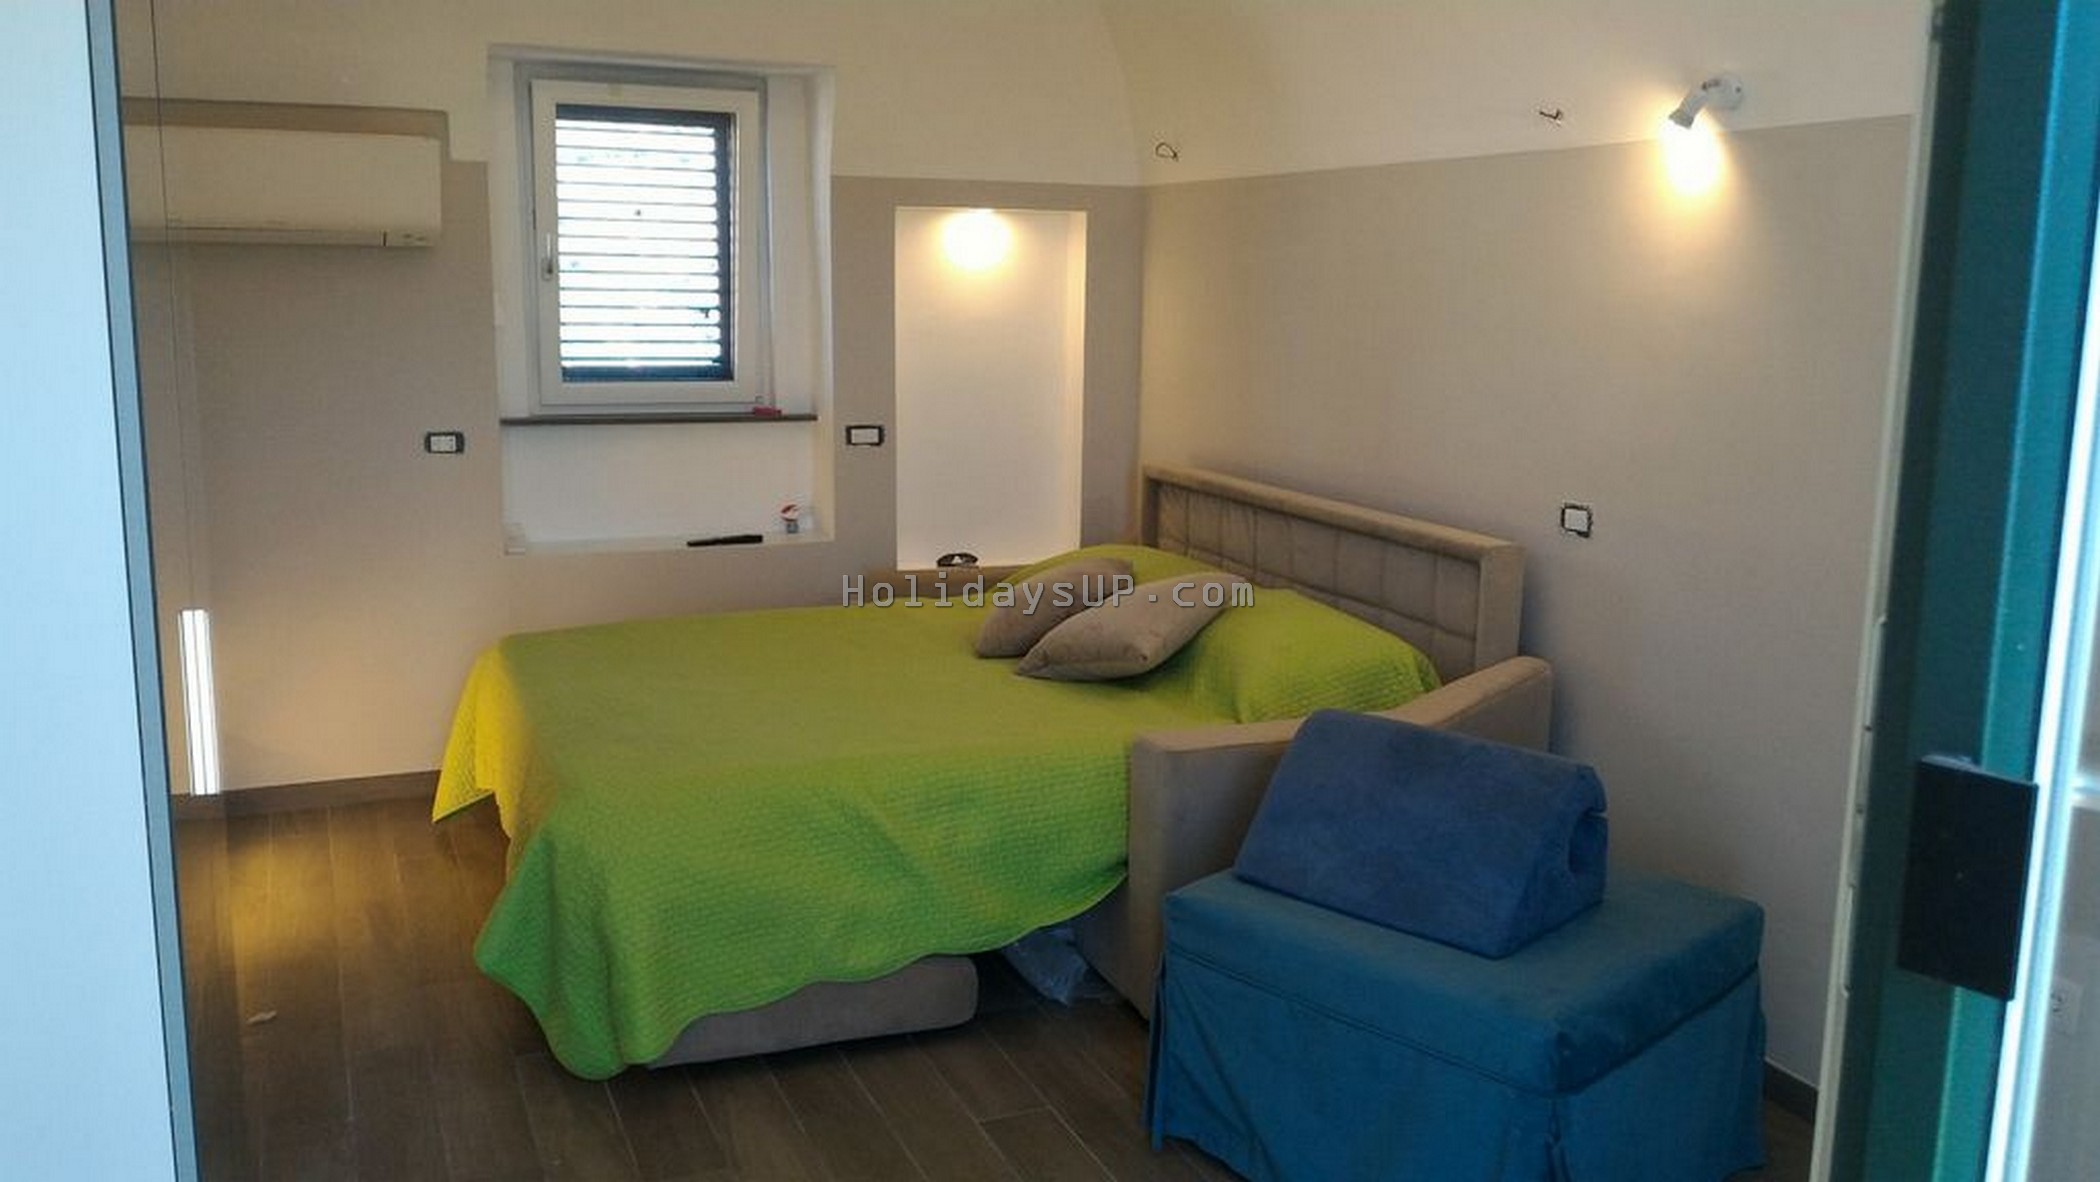 Barone suite room with double sofabed and terrace relax in Massa Lubrense